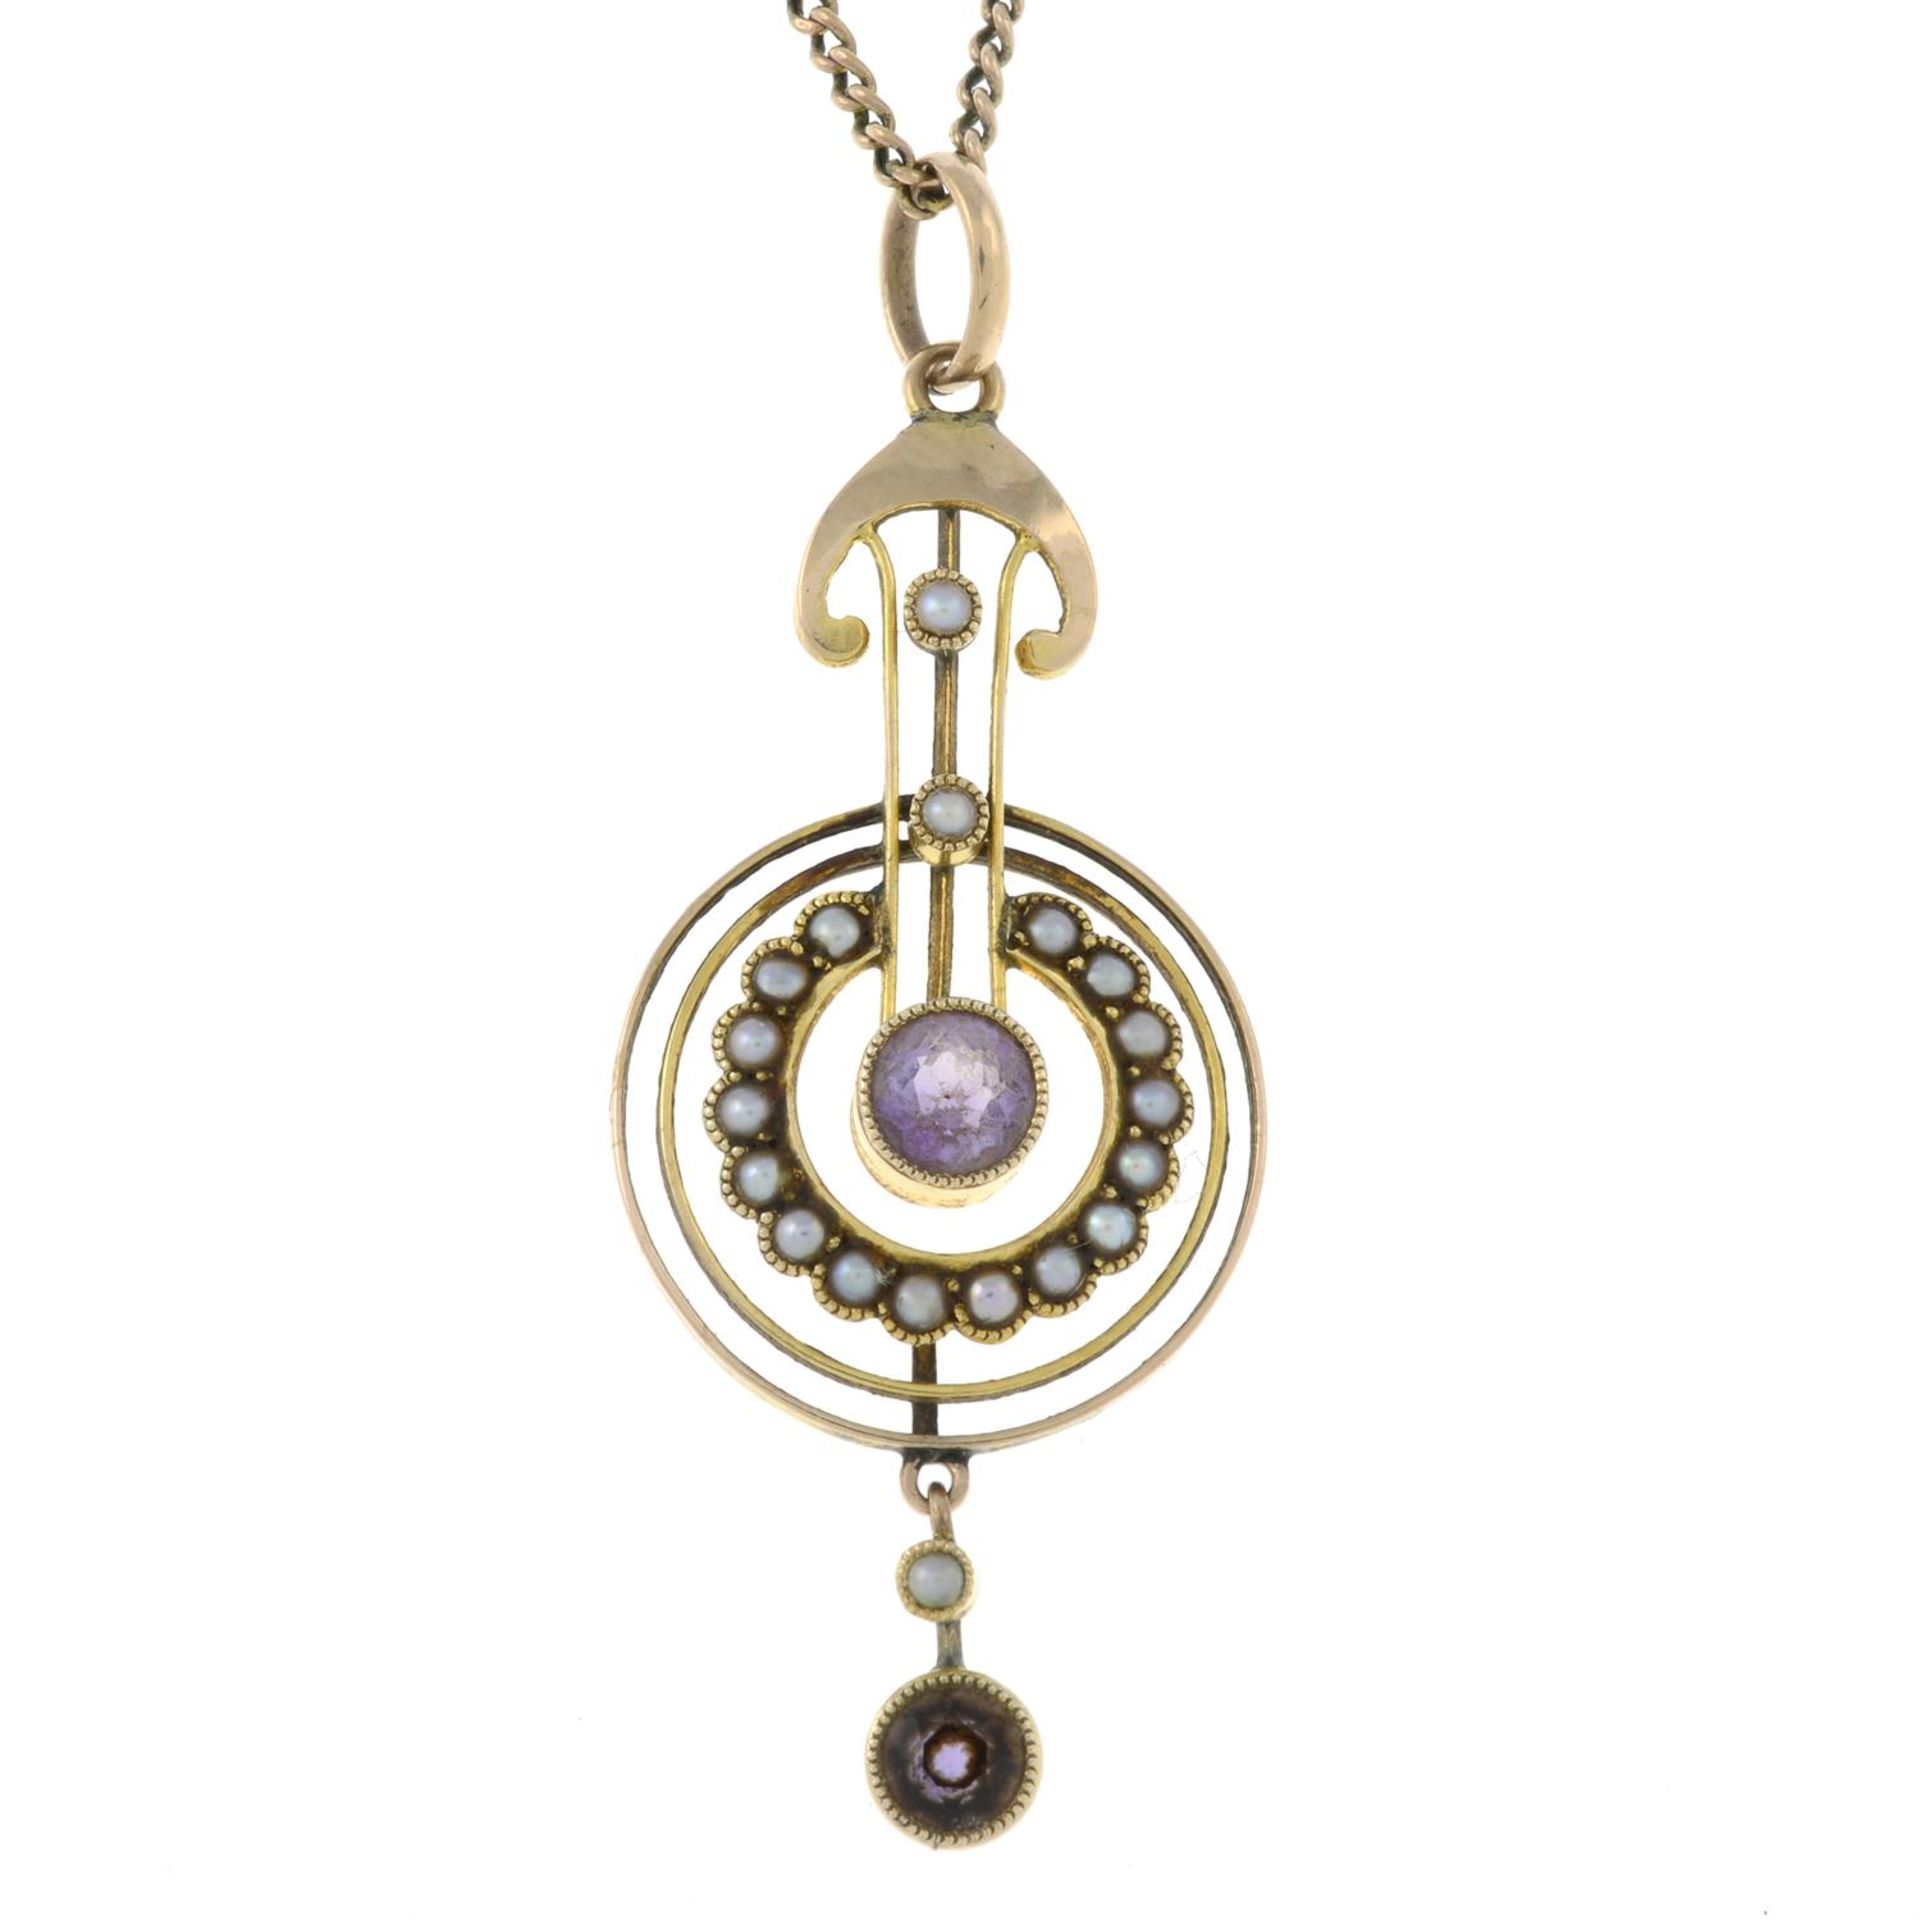 An early 20th century 9ct gold amethyst and split pearl pendant, suspended from an early 20th